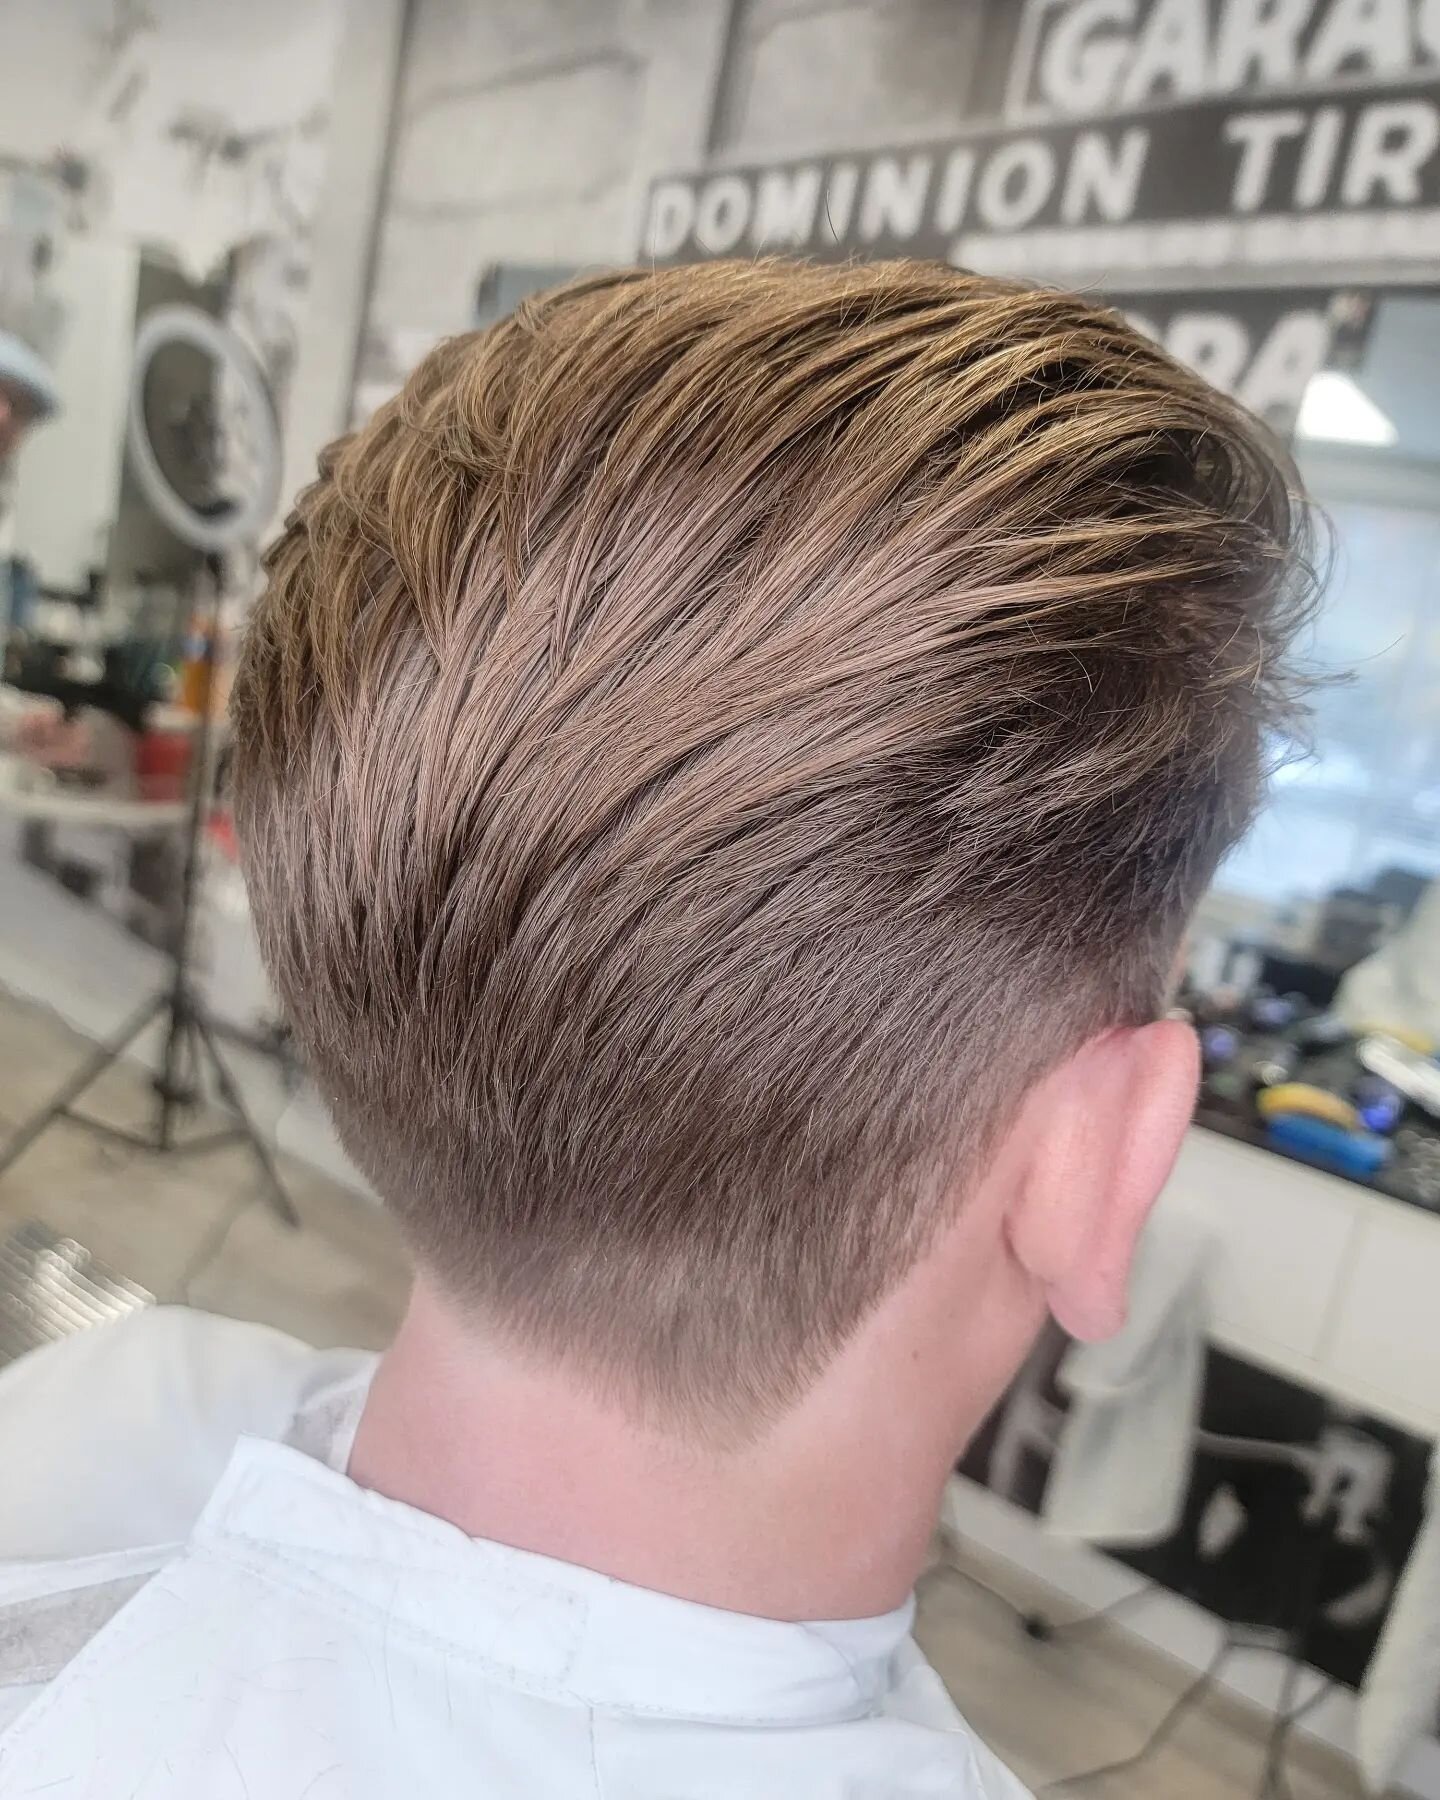 Winter is coming 🥶

If you would like to keep your hair longer but want a clean look, you can have it shortened the sides and blended to the top.

Book an appointment and ask us today! 

Www.Lebarbershop.ca 

@lezathebarber 

#kitchener #kitchenerwa